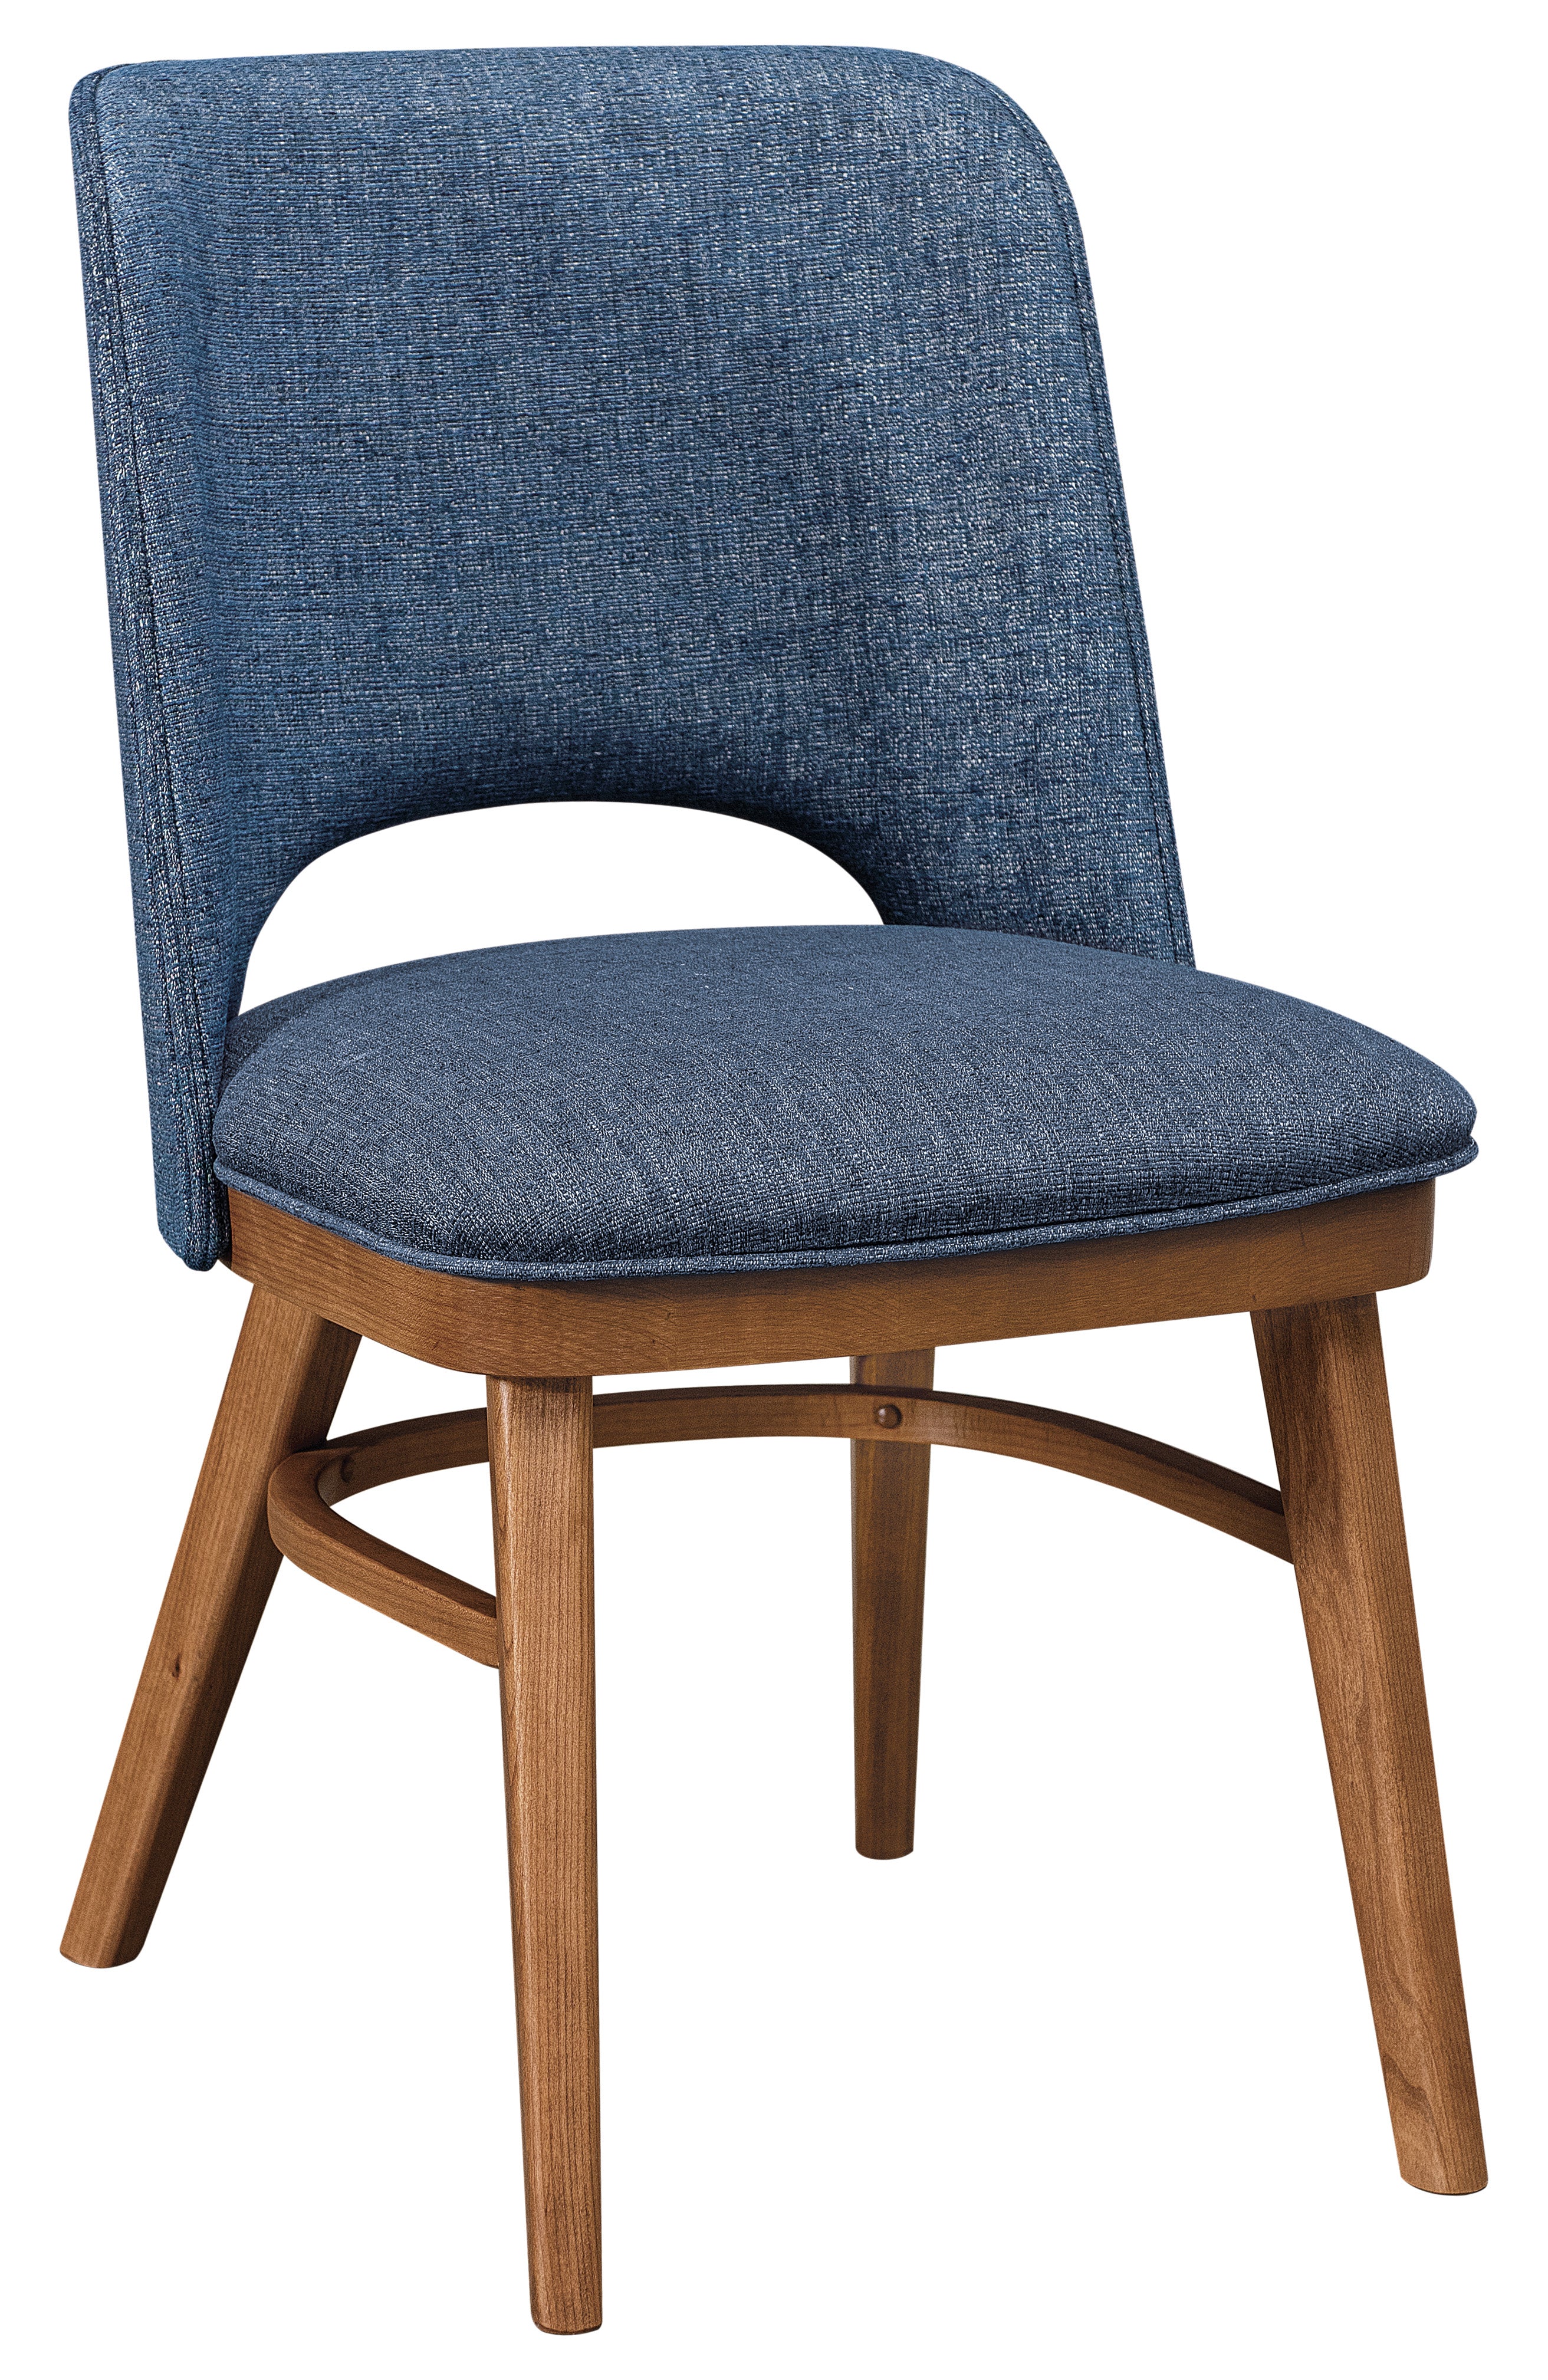 vinson dining chair with chestnut stain and royal fabric c2-35